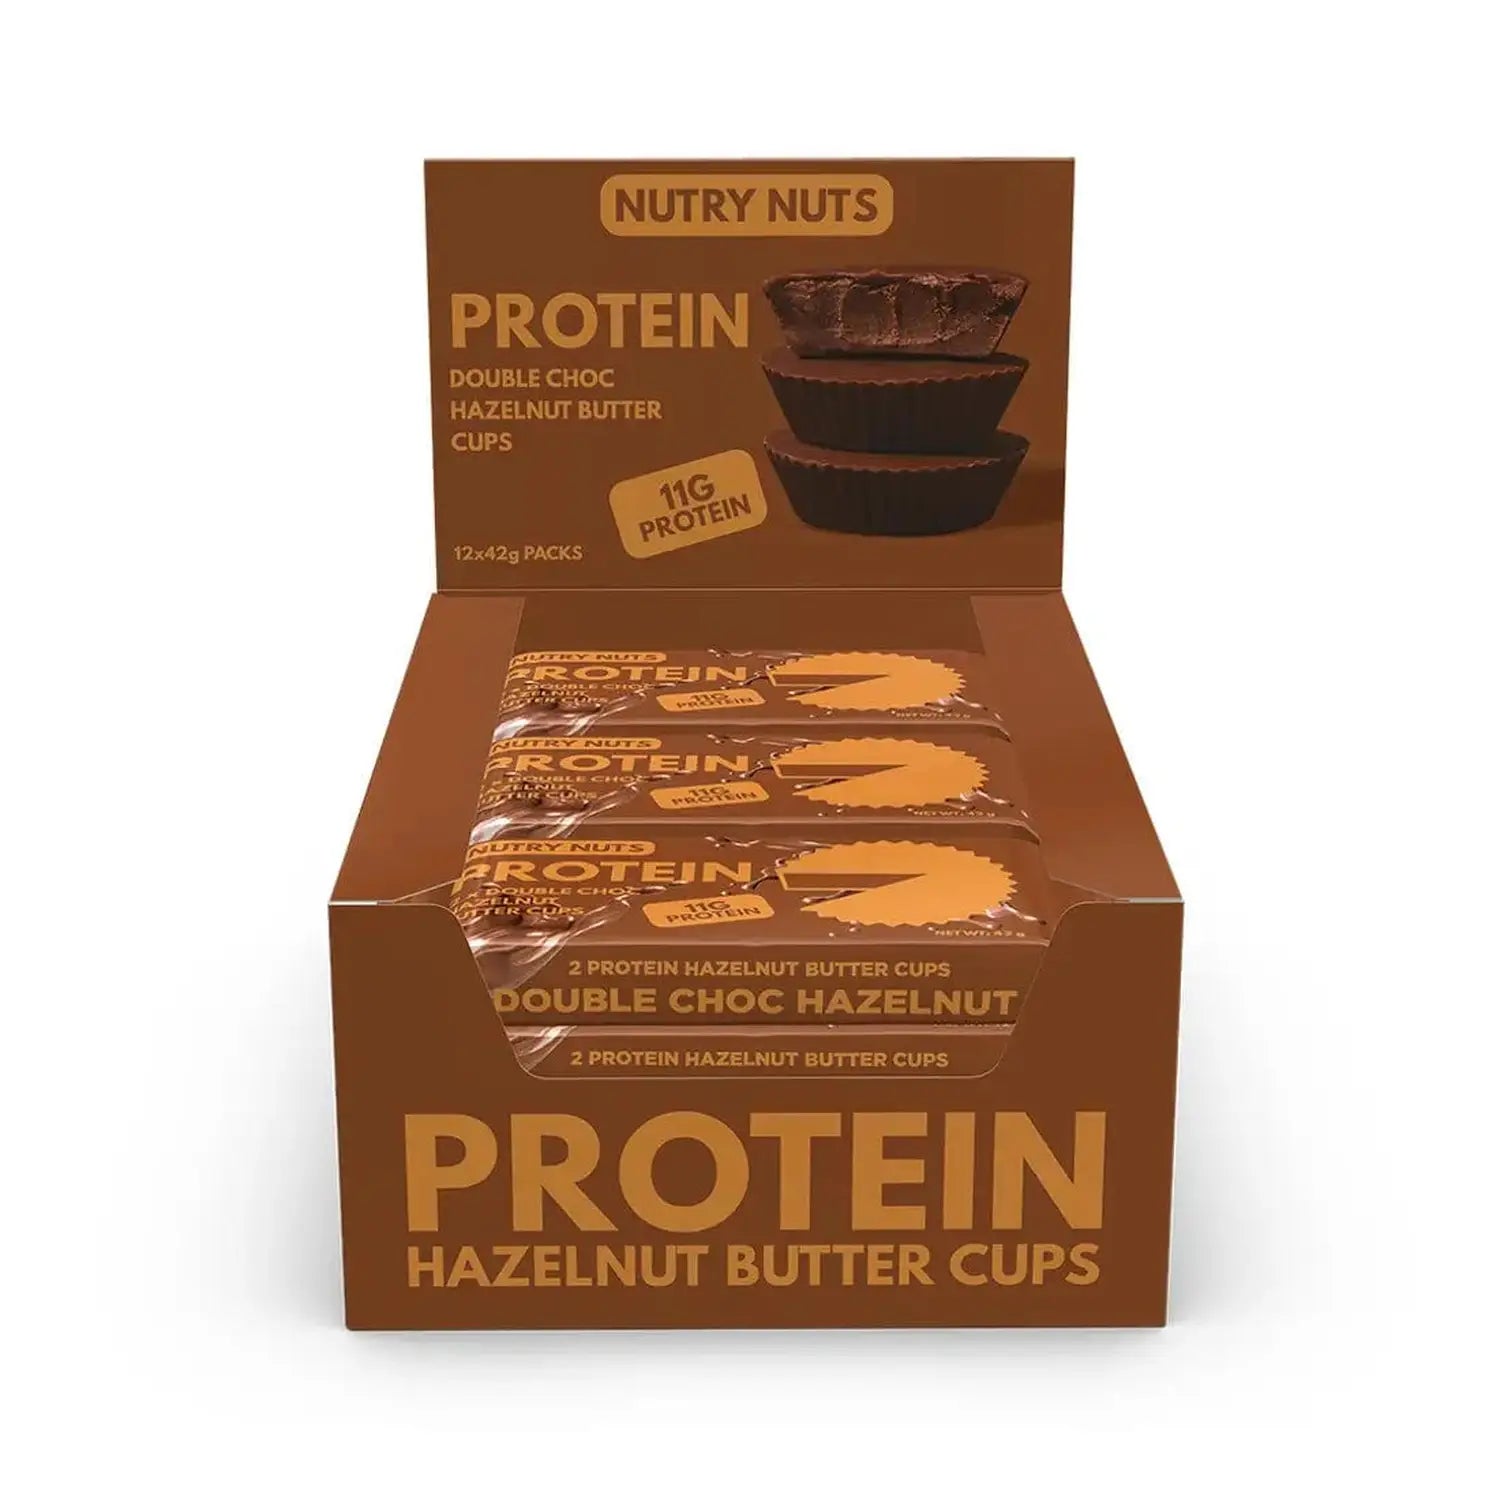 Nutry Nuts Nutry Nuts - Protein Peanut Butter Cups 12 x 42 g Double Chocolate Hazelnut kaufen bei HighPowered.ch